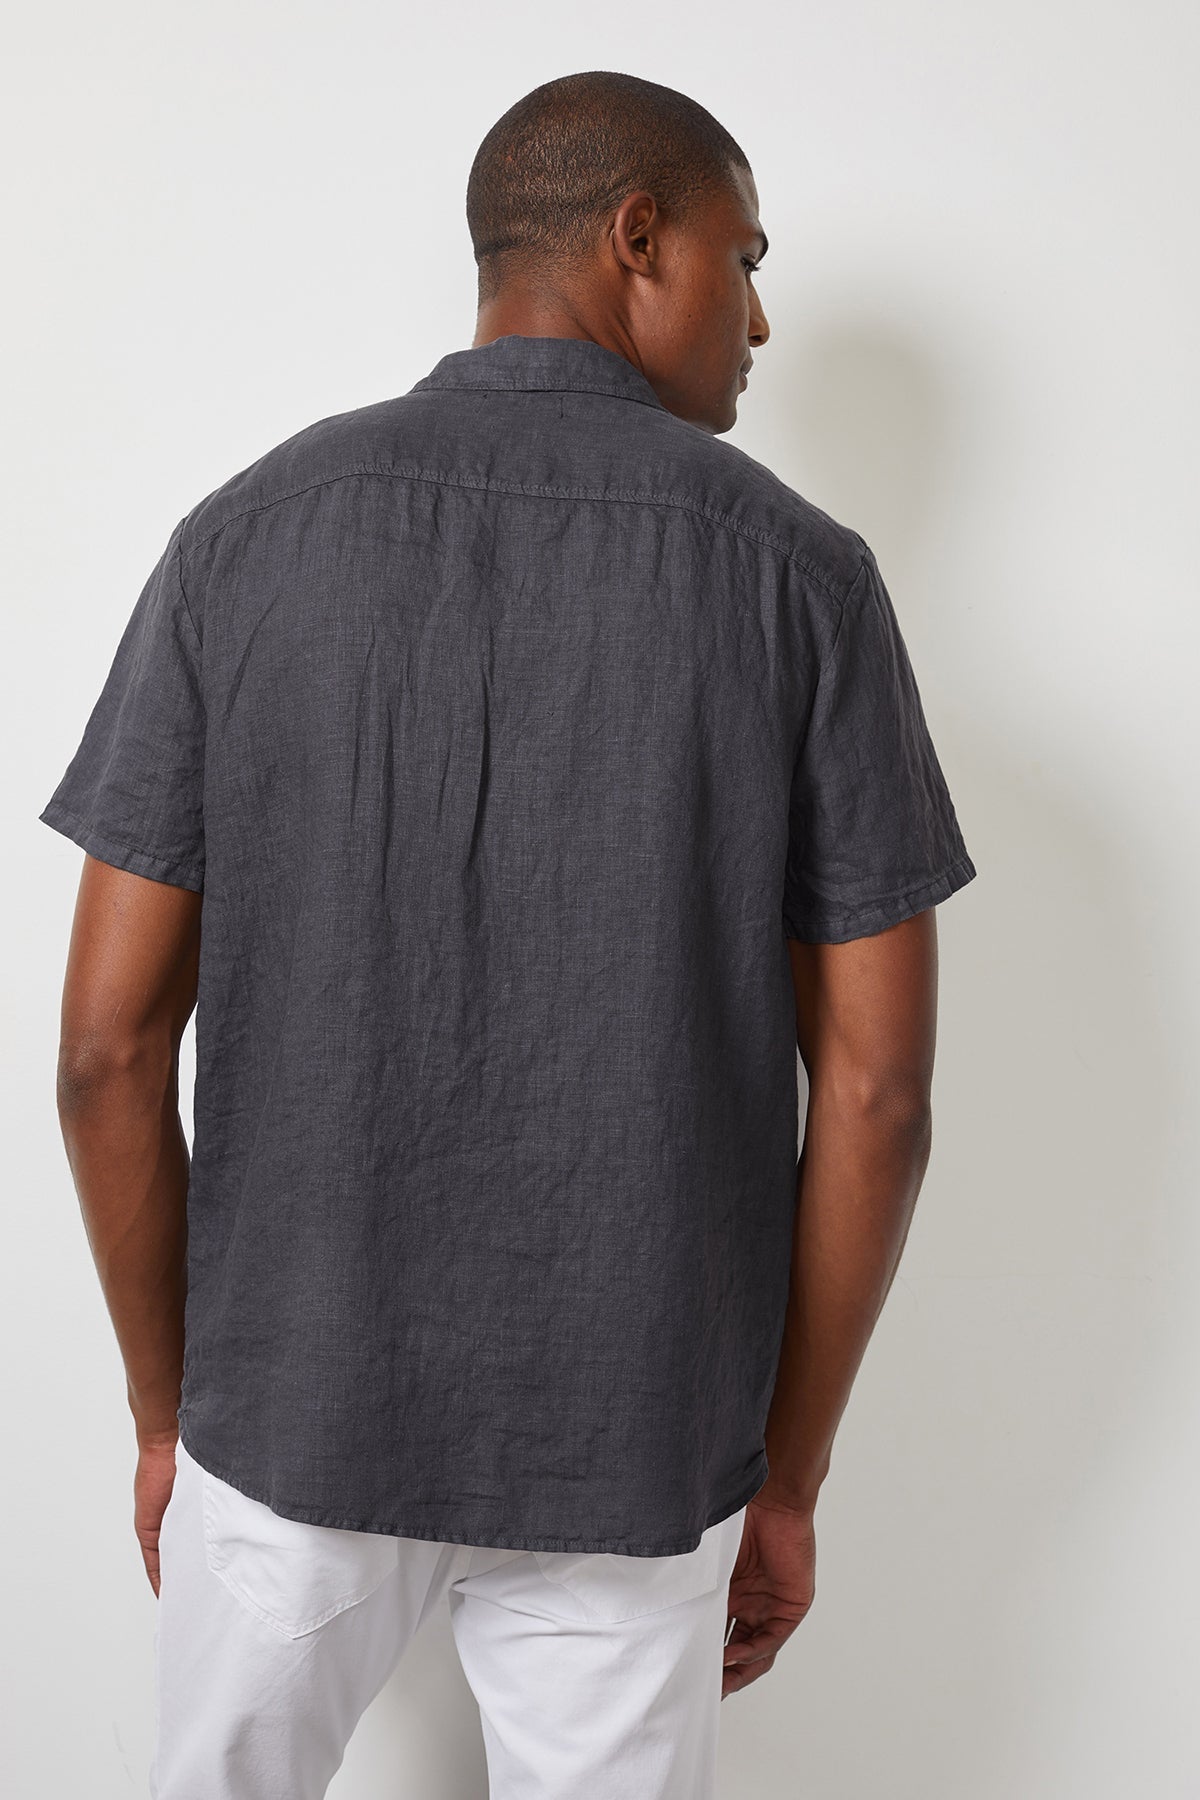   Mackie linen button up shirt in carbon 